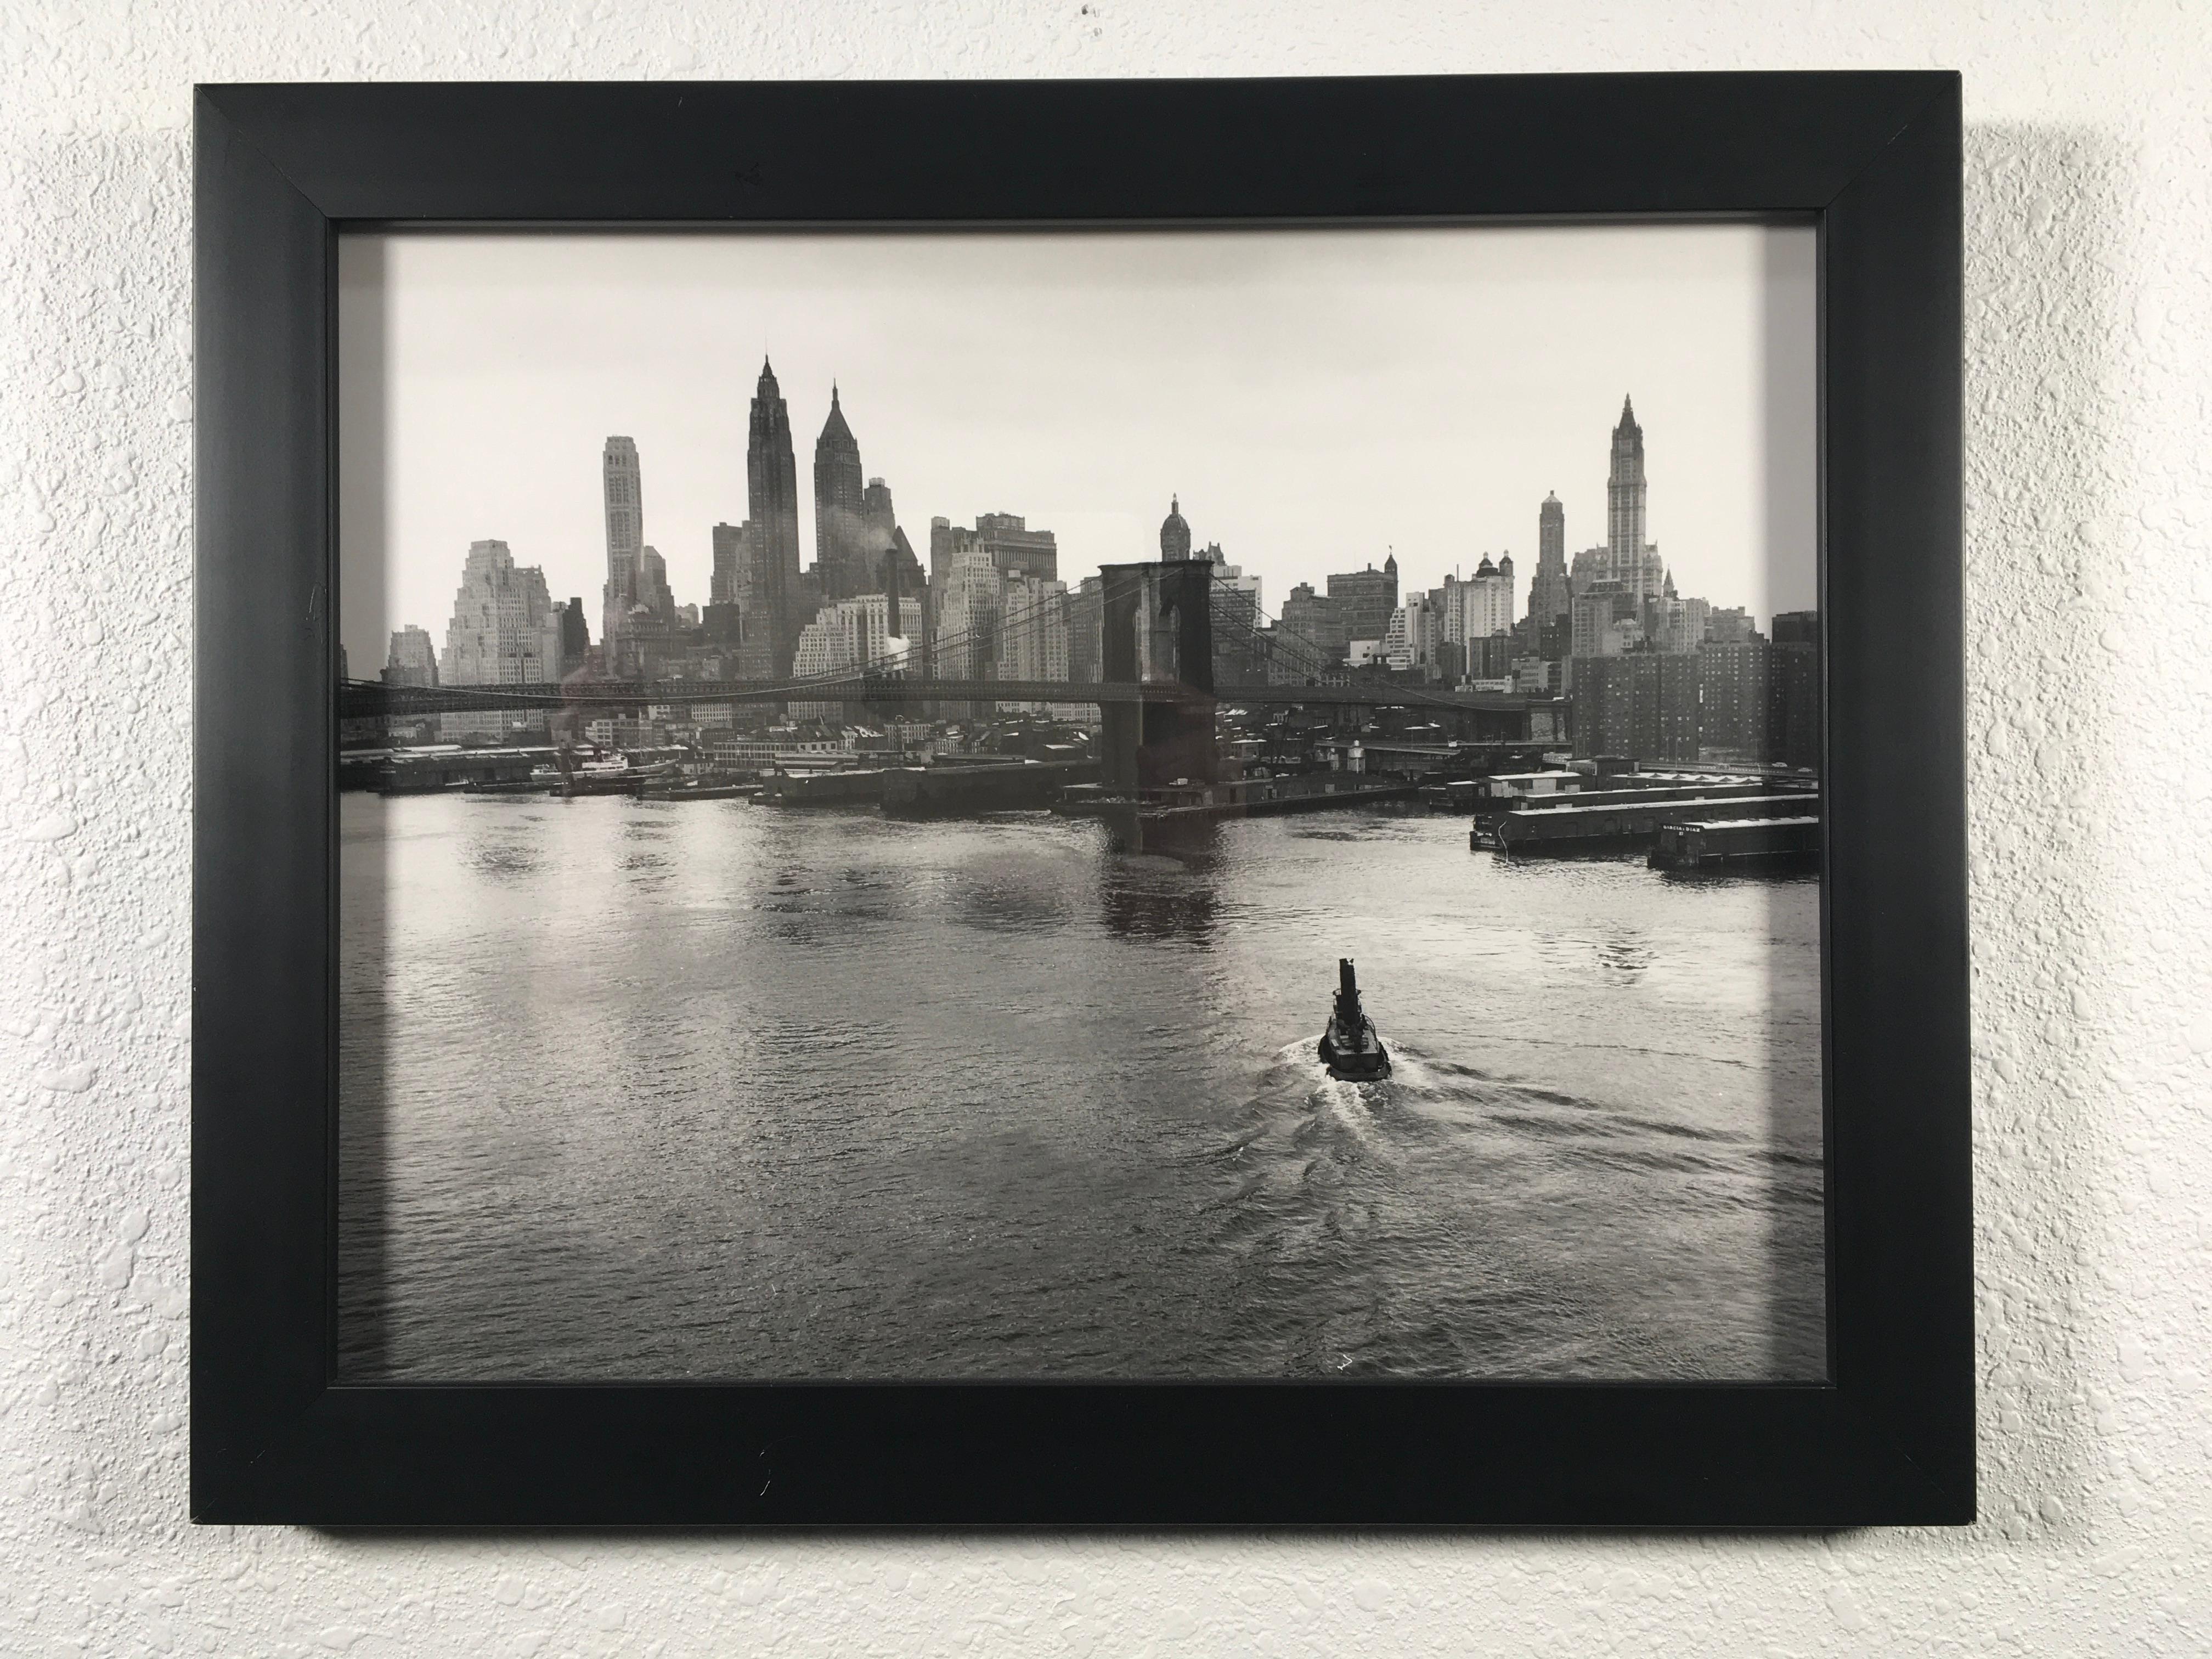  'Vintage Manhattan Skyline' with River', by Unknown, Black & White Photograph For Sale 1